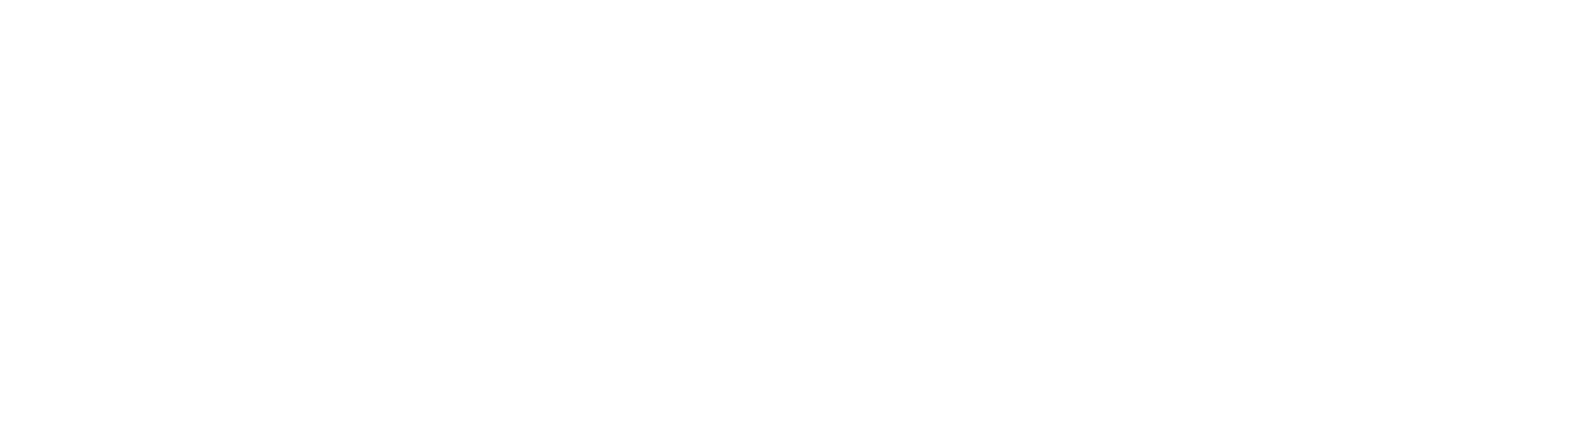 Zevra Therapeutics logo large for dark backgrounds (transparent PNG)